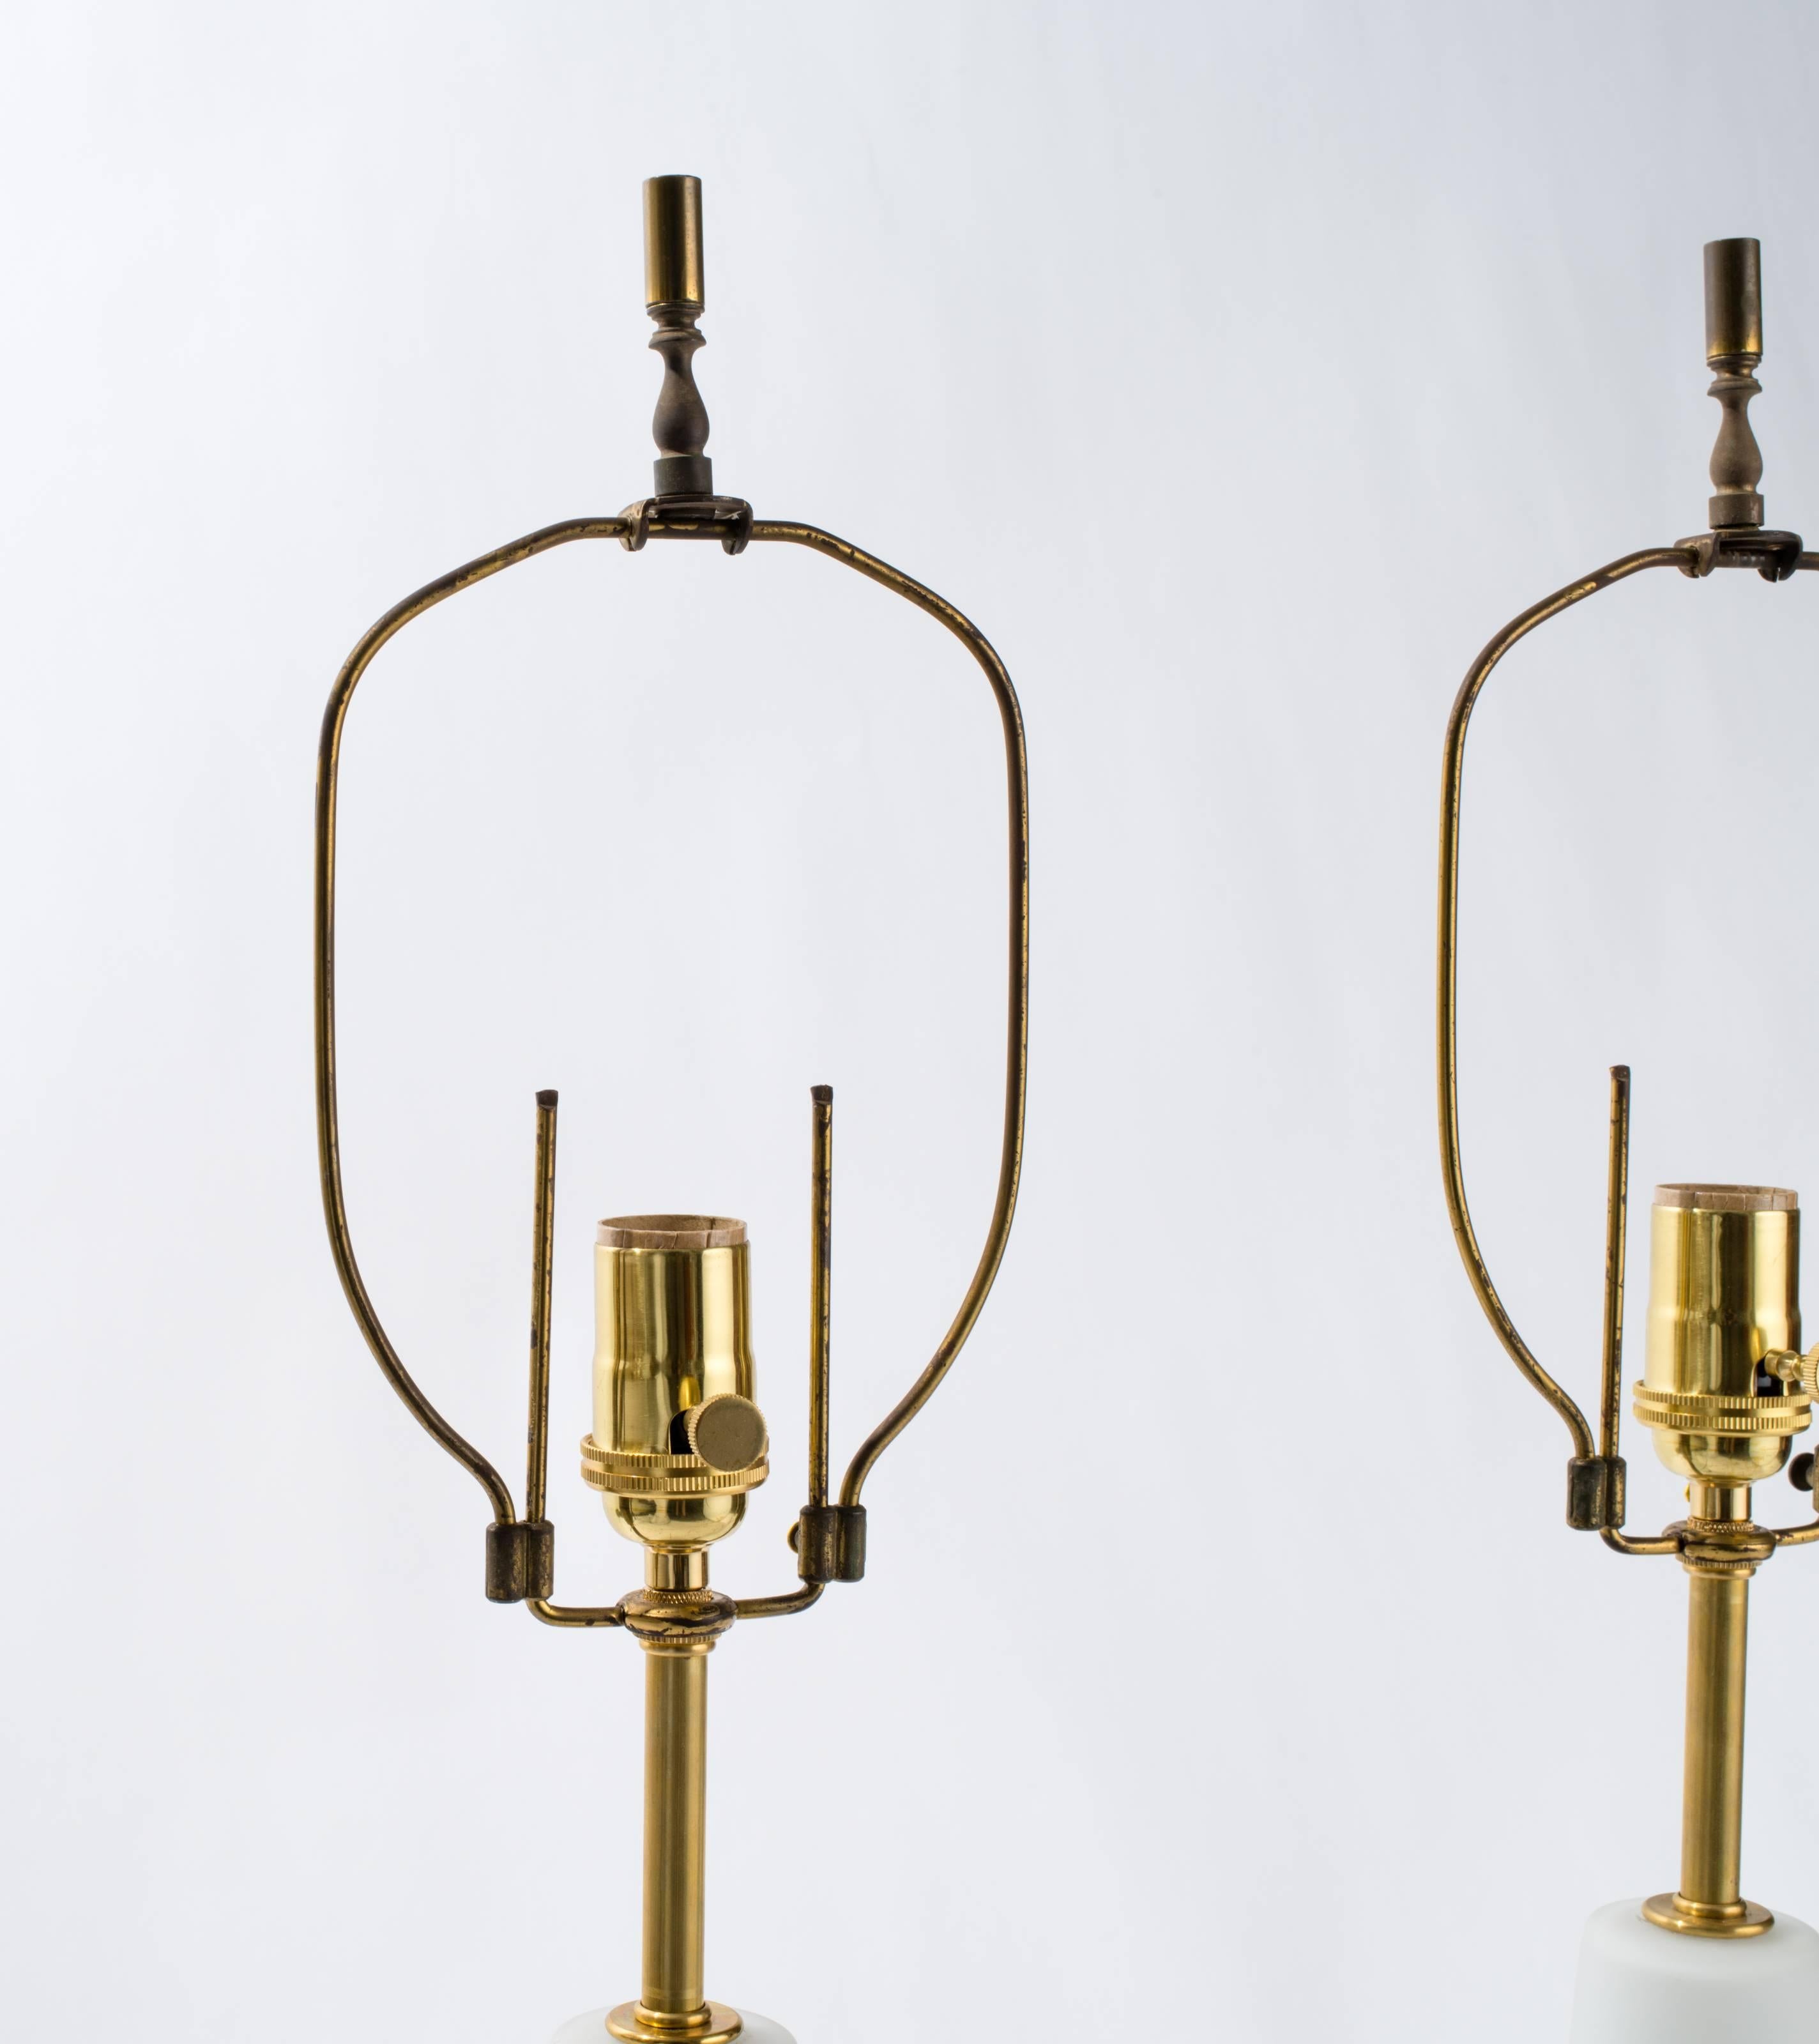 1950s blown glass and wood base table lamps.
Newly rewired with brass sockets. Original adjustable harp.